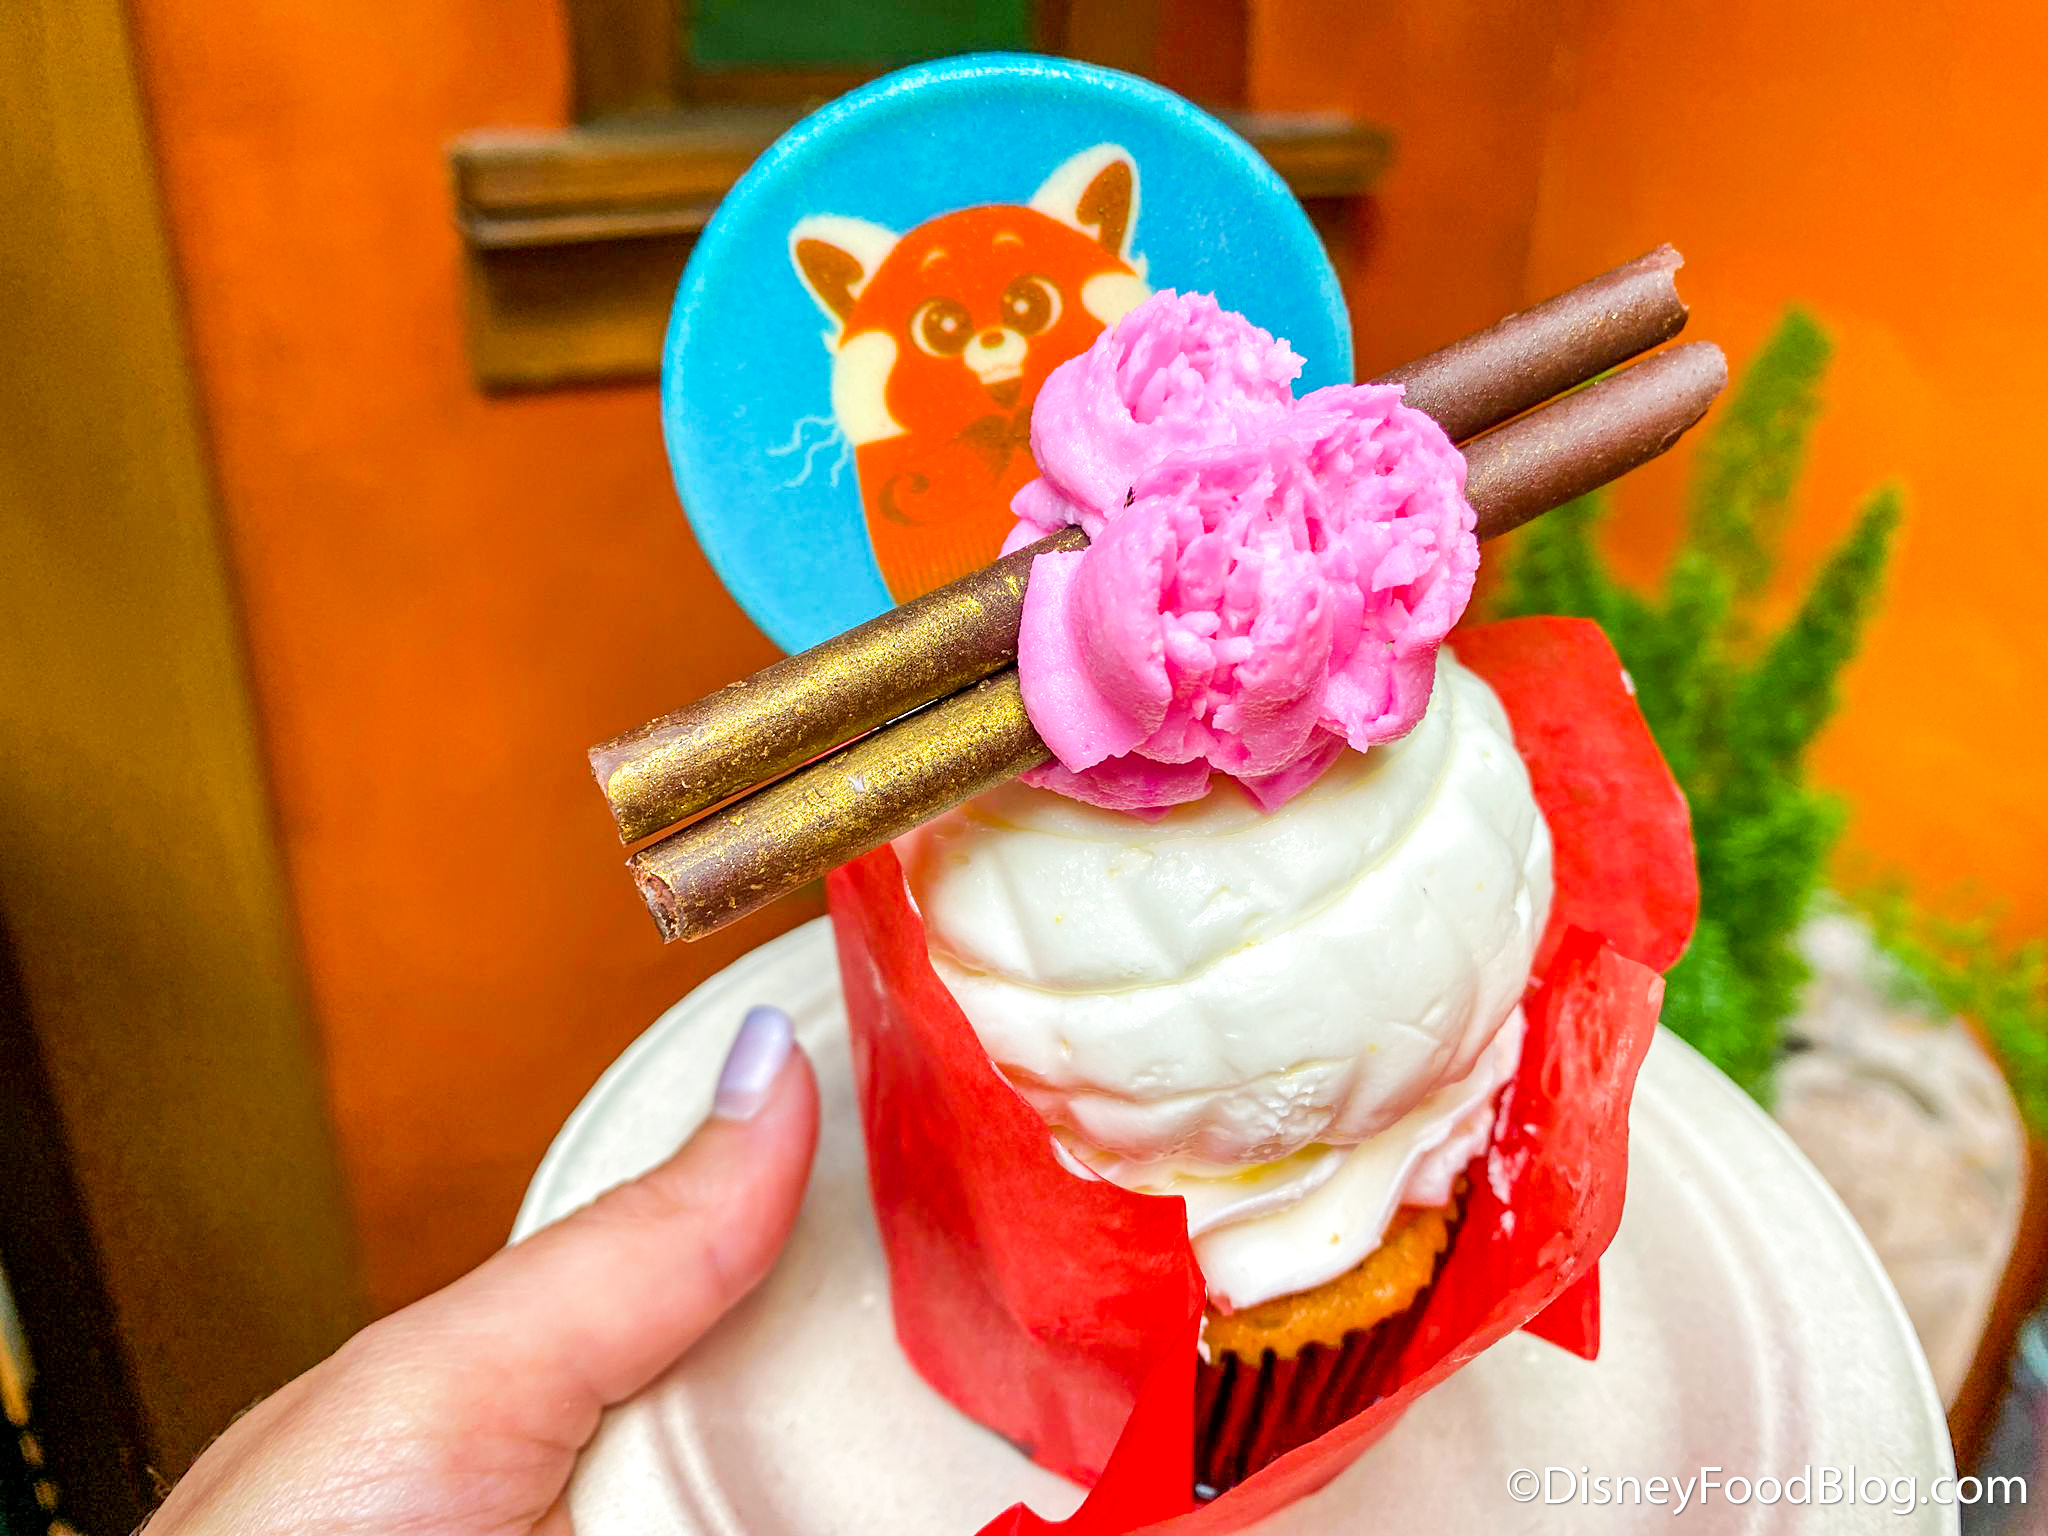 Red Panda Cake for Teddy's 5th Birthday